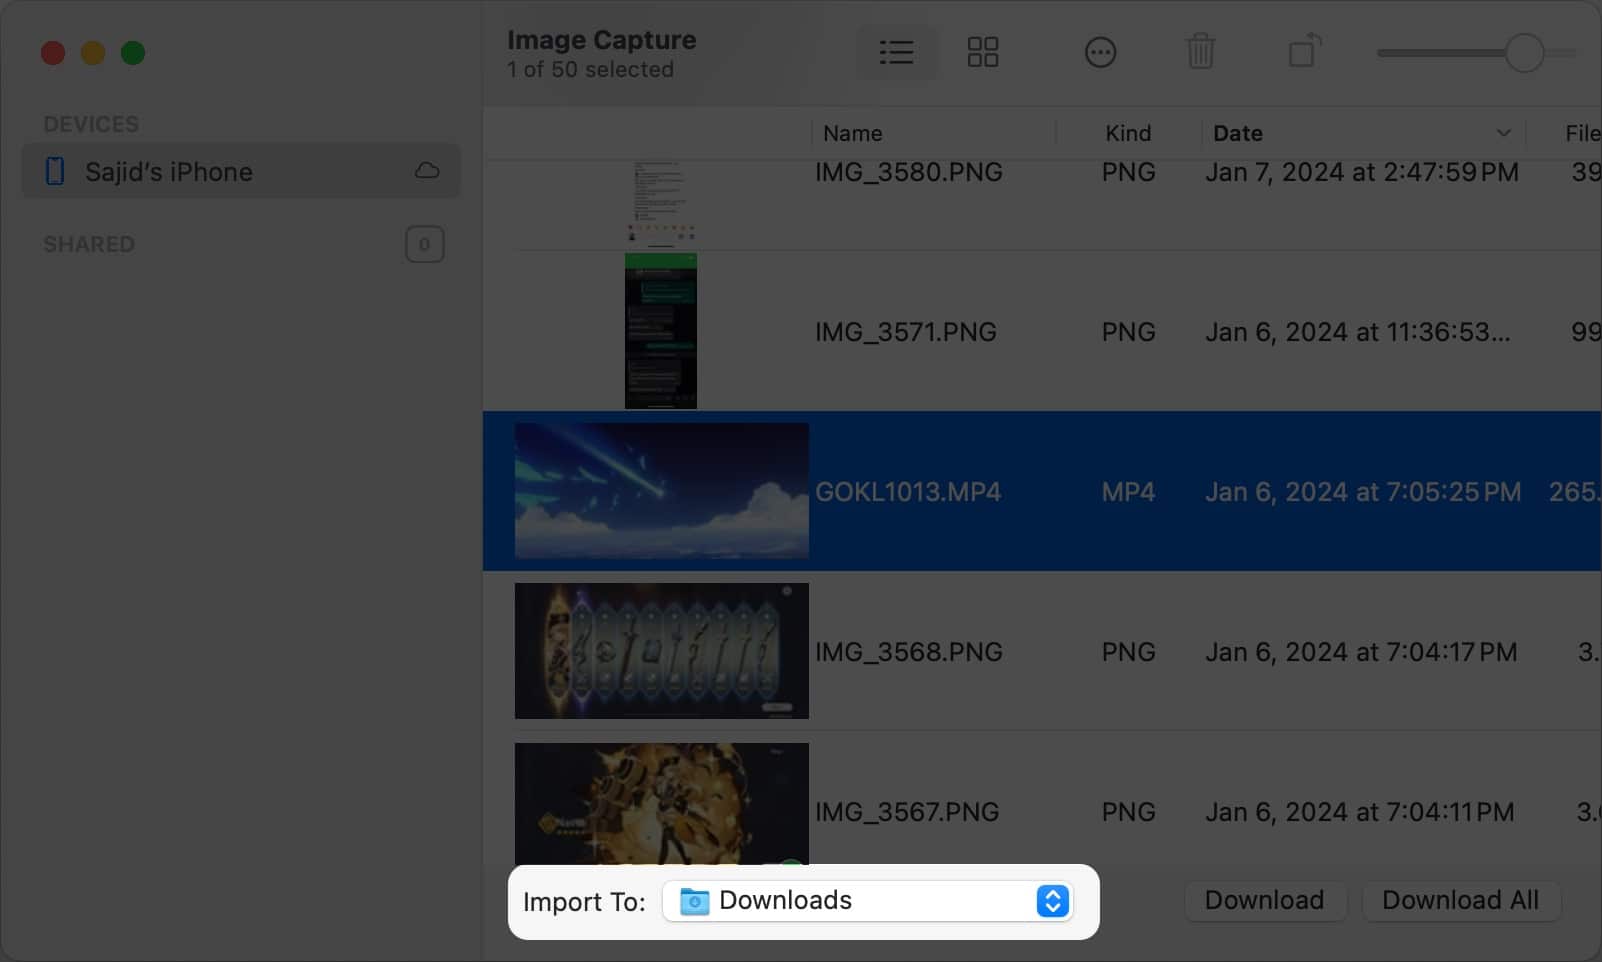 Choose where to download in ImageCapture app